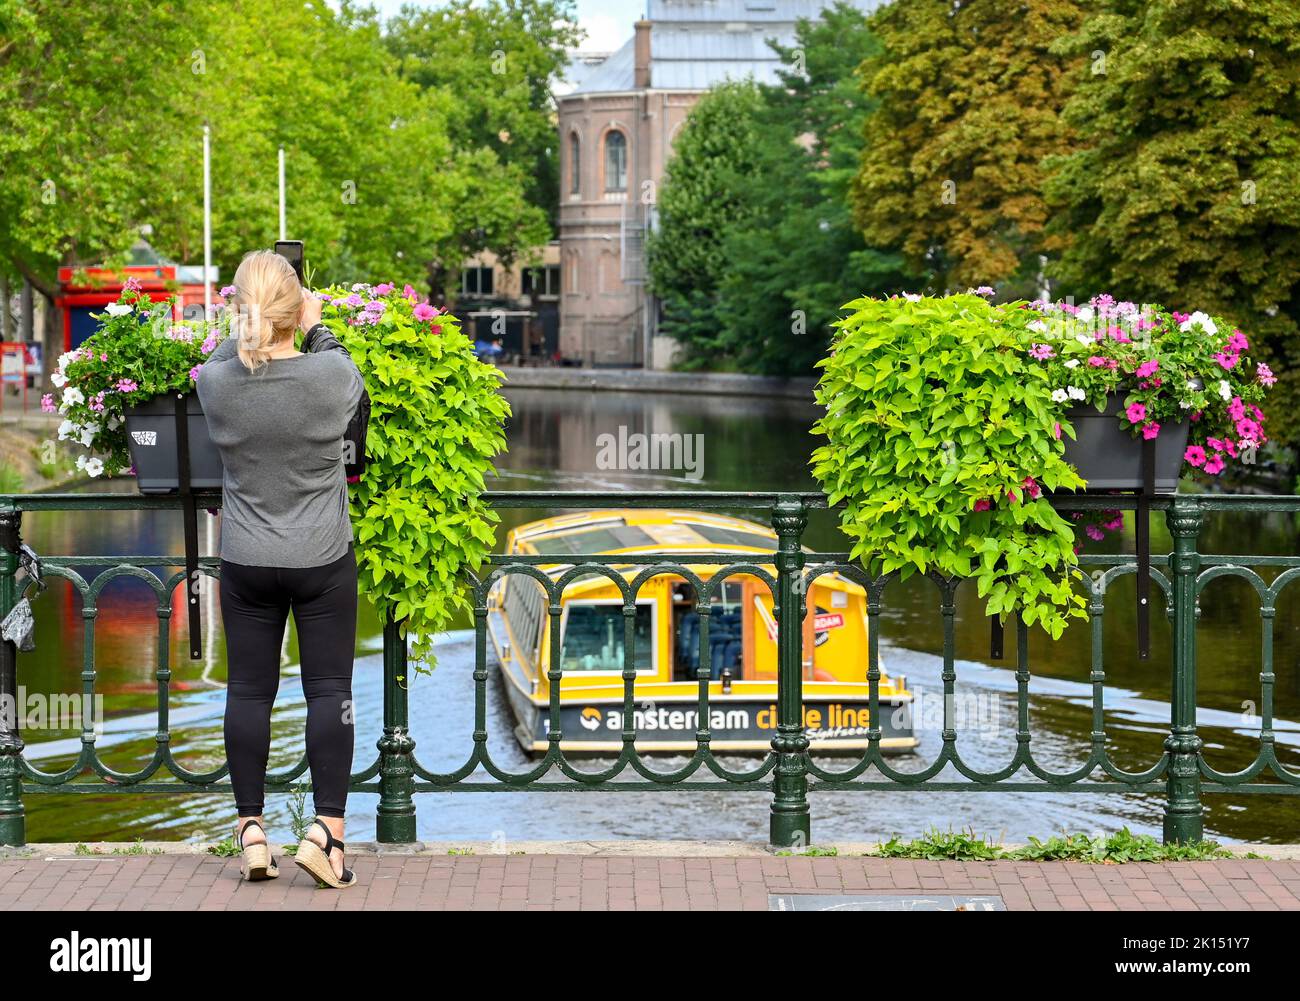 Amsterdam, Netherlands - August 2022: Person on a bridge with flower baskets taking a picture of a boat on one of the city's canals Stock Photo